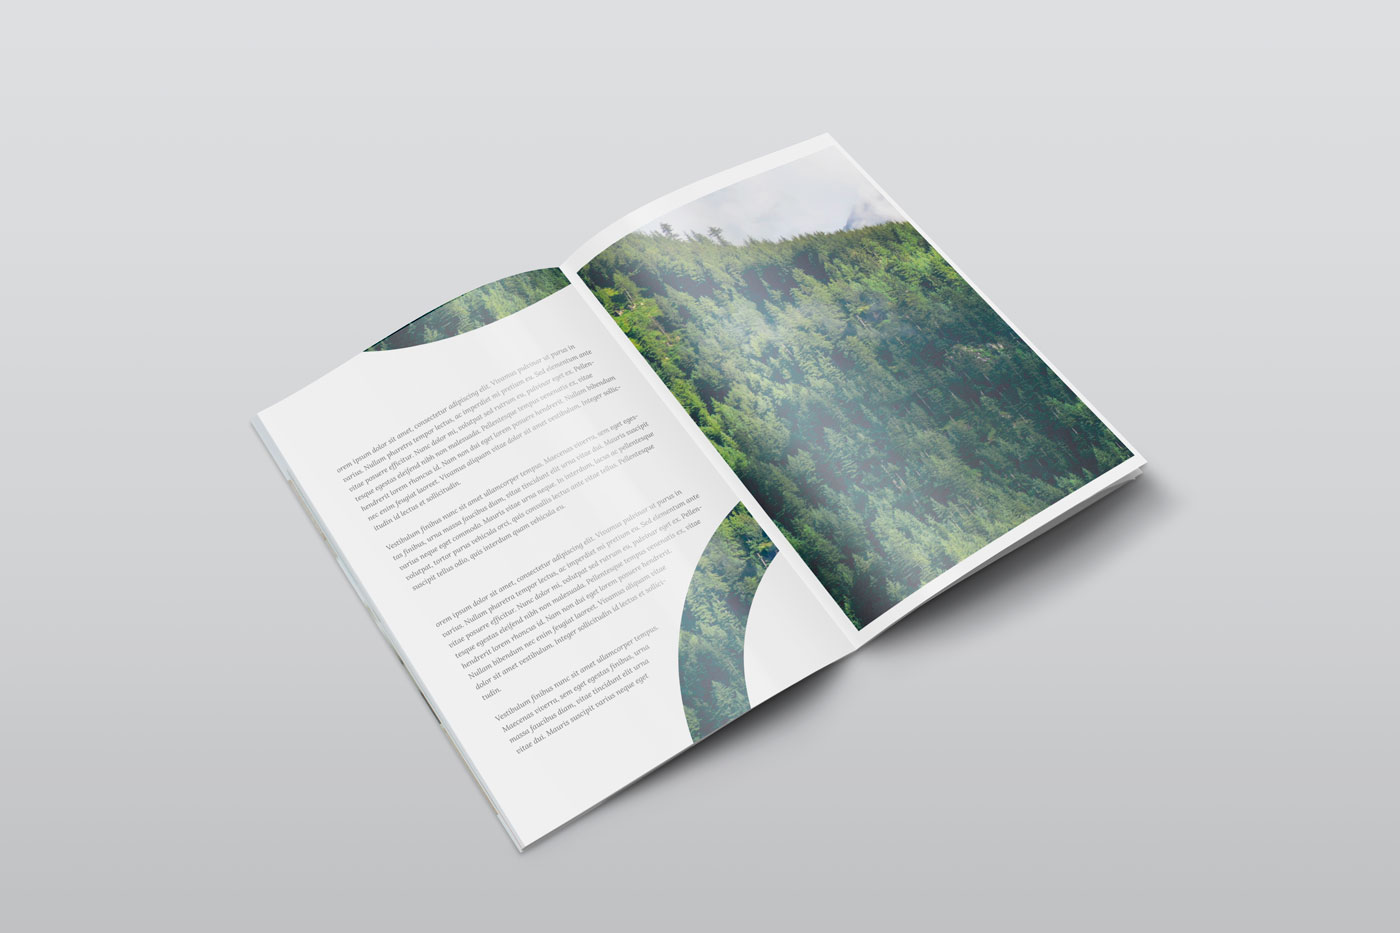 Download Free Isometric A4 Psd Magazine Mockup By Mats Peter Forss On Dribbble PSD Mockup Templates